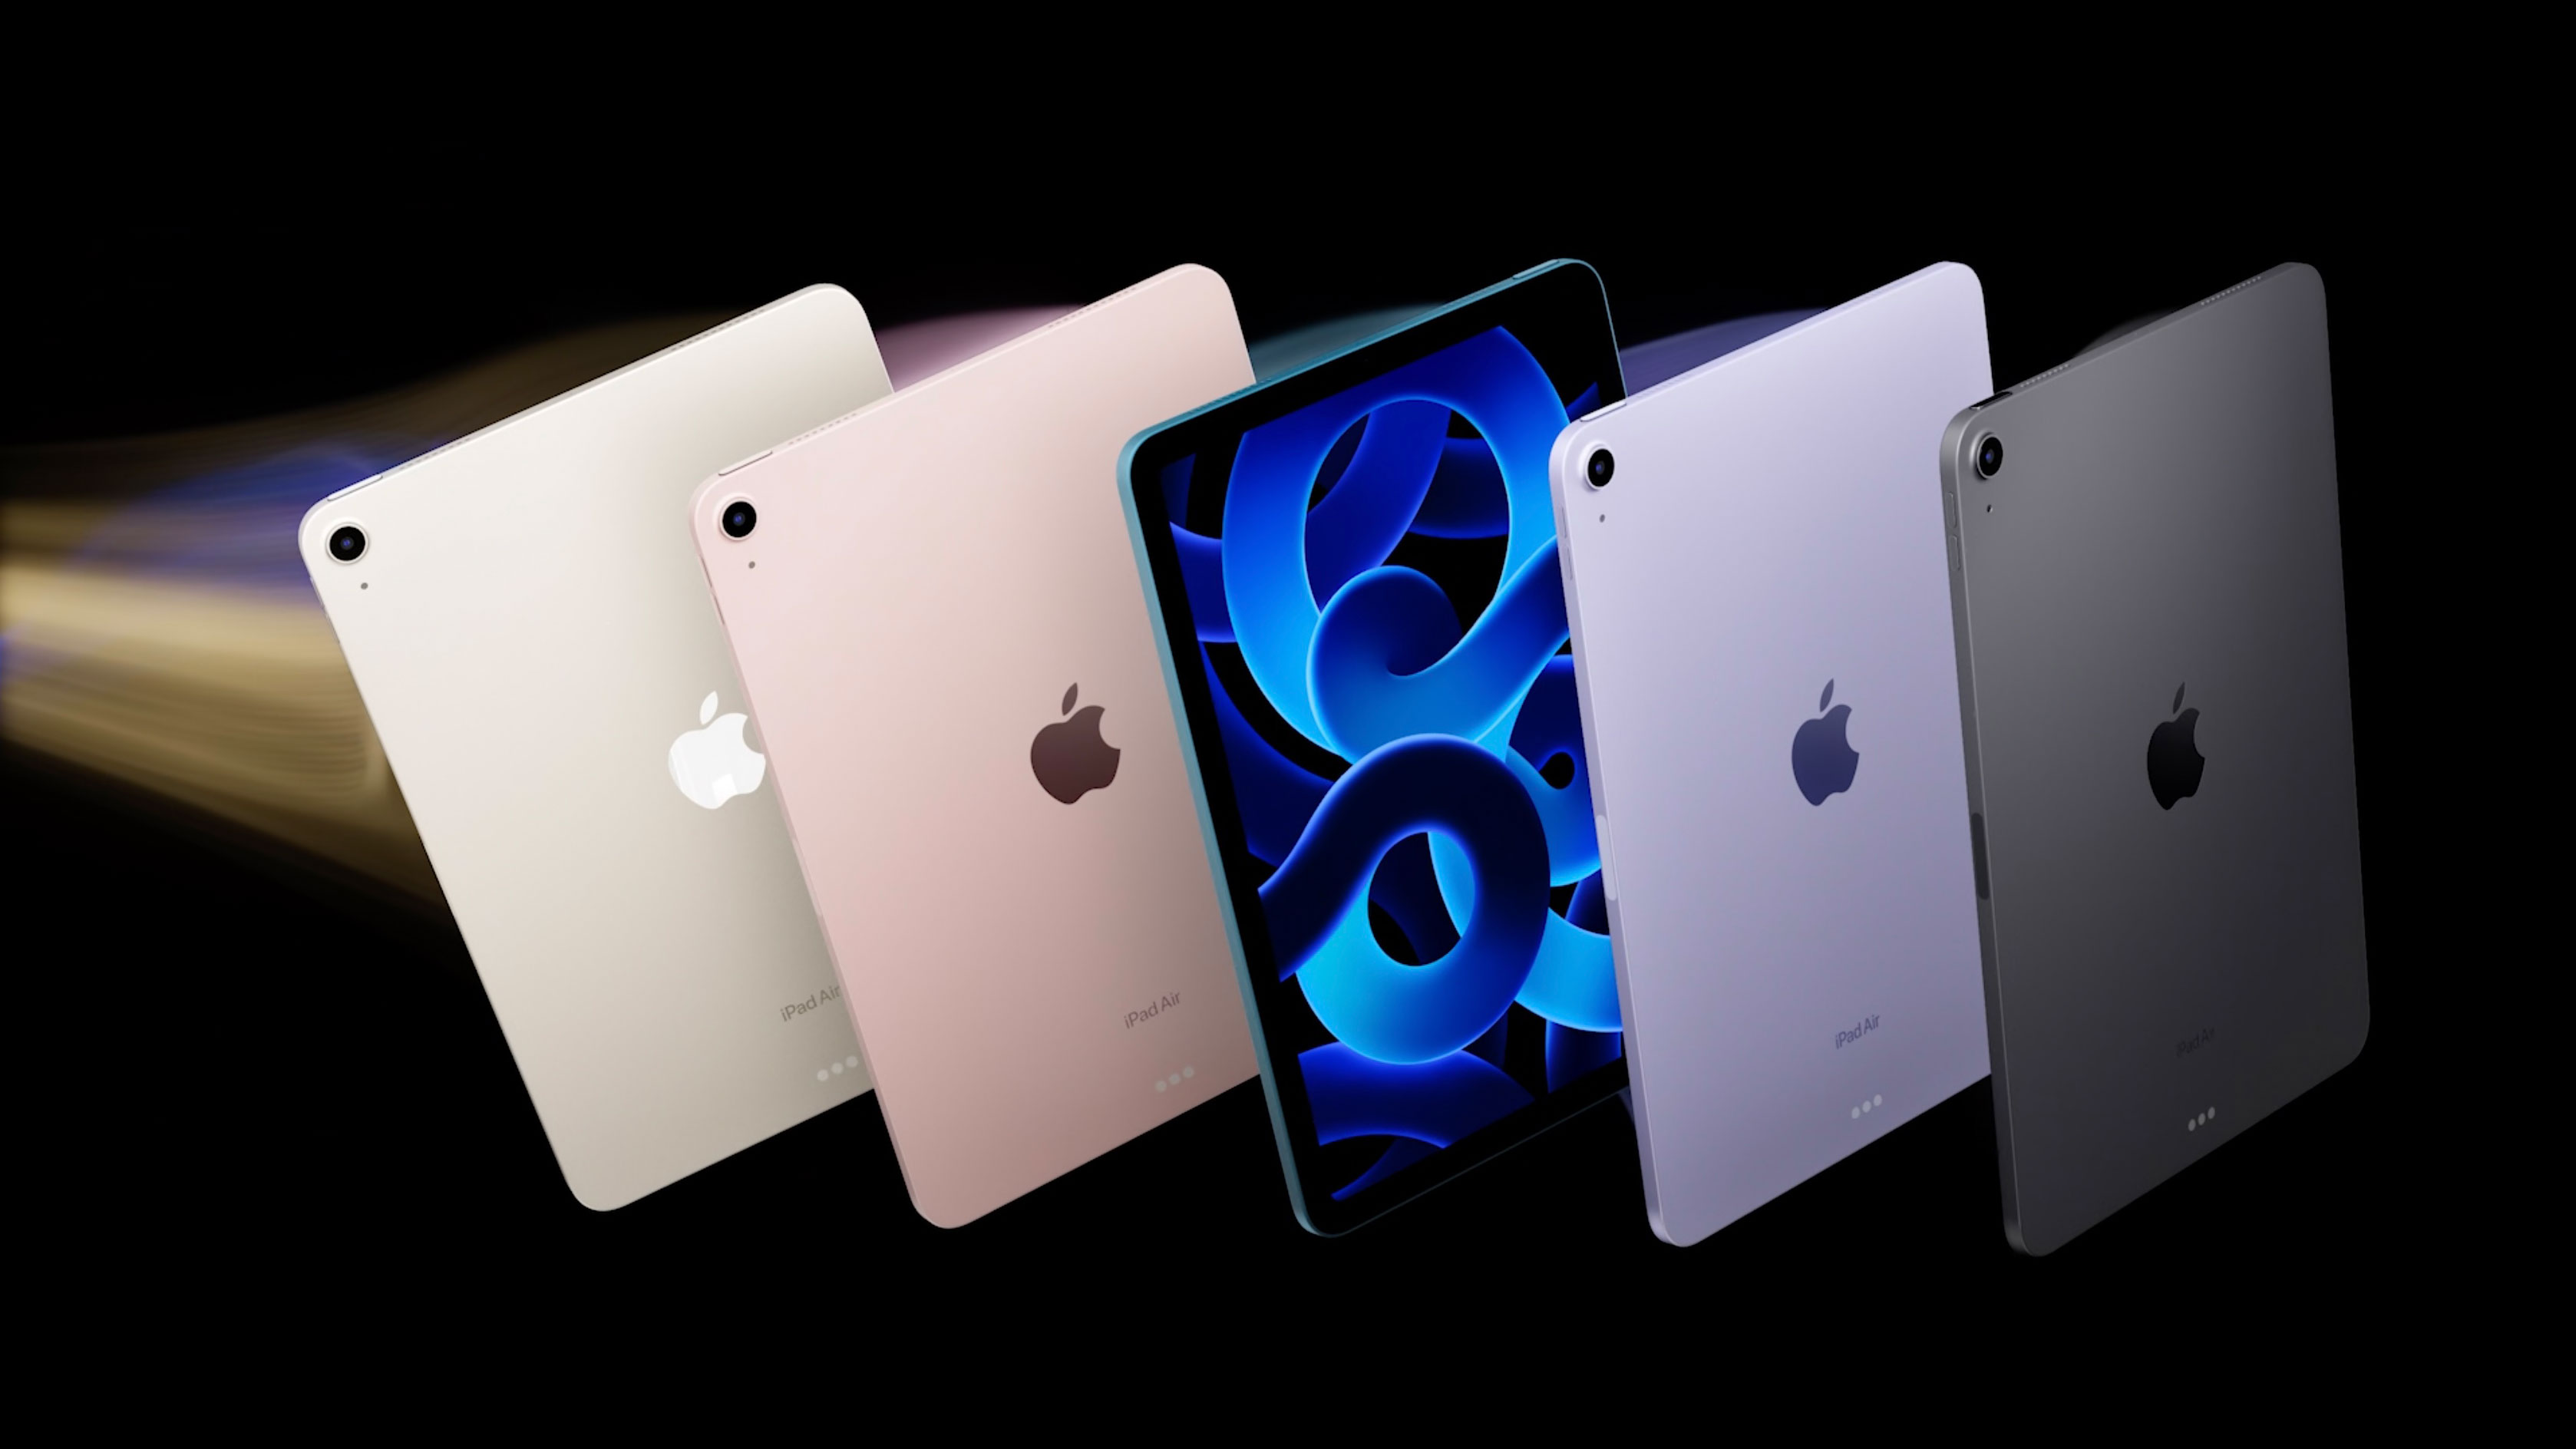 Apple releases iPad Air 5 with M1 processor, positioning it as a